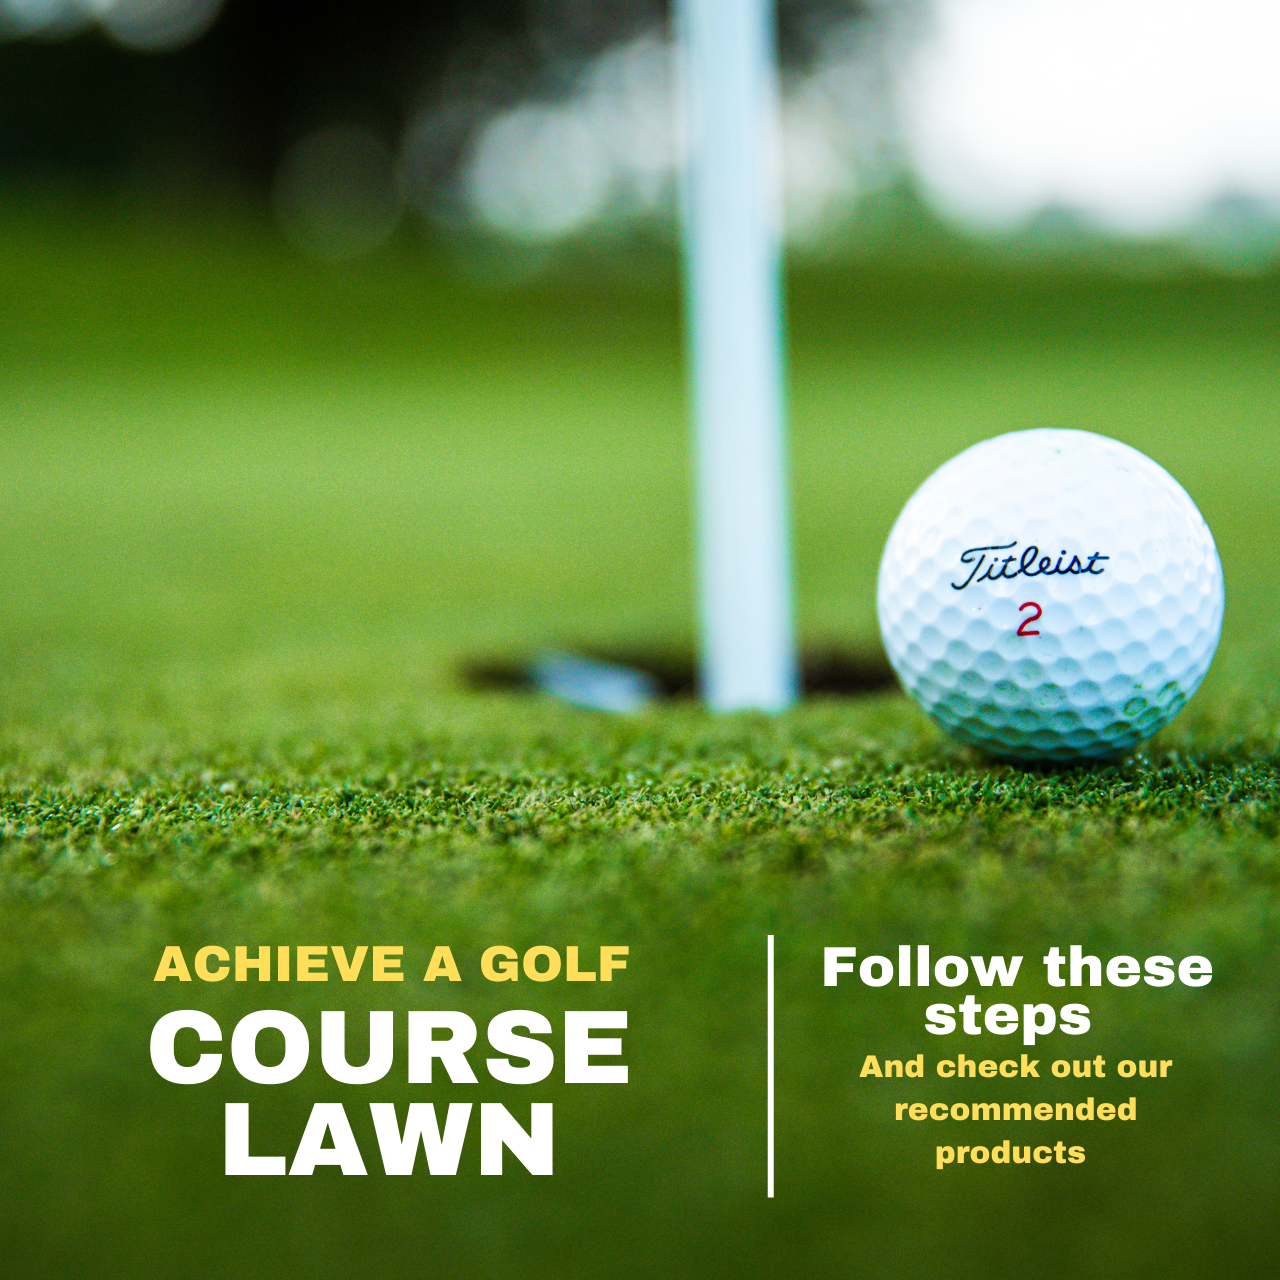 Achieving a Green Golf Course Lawn